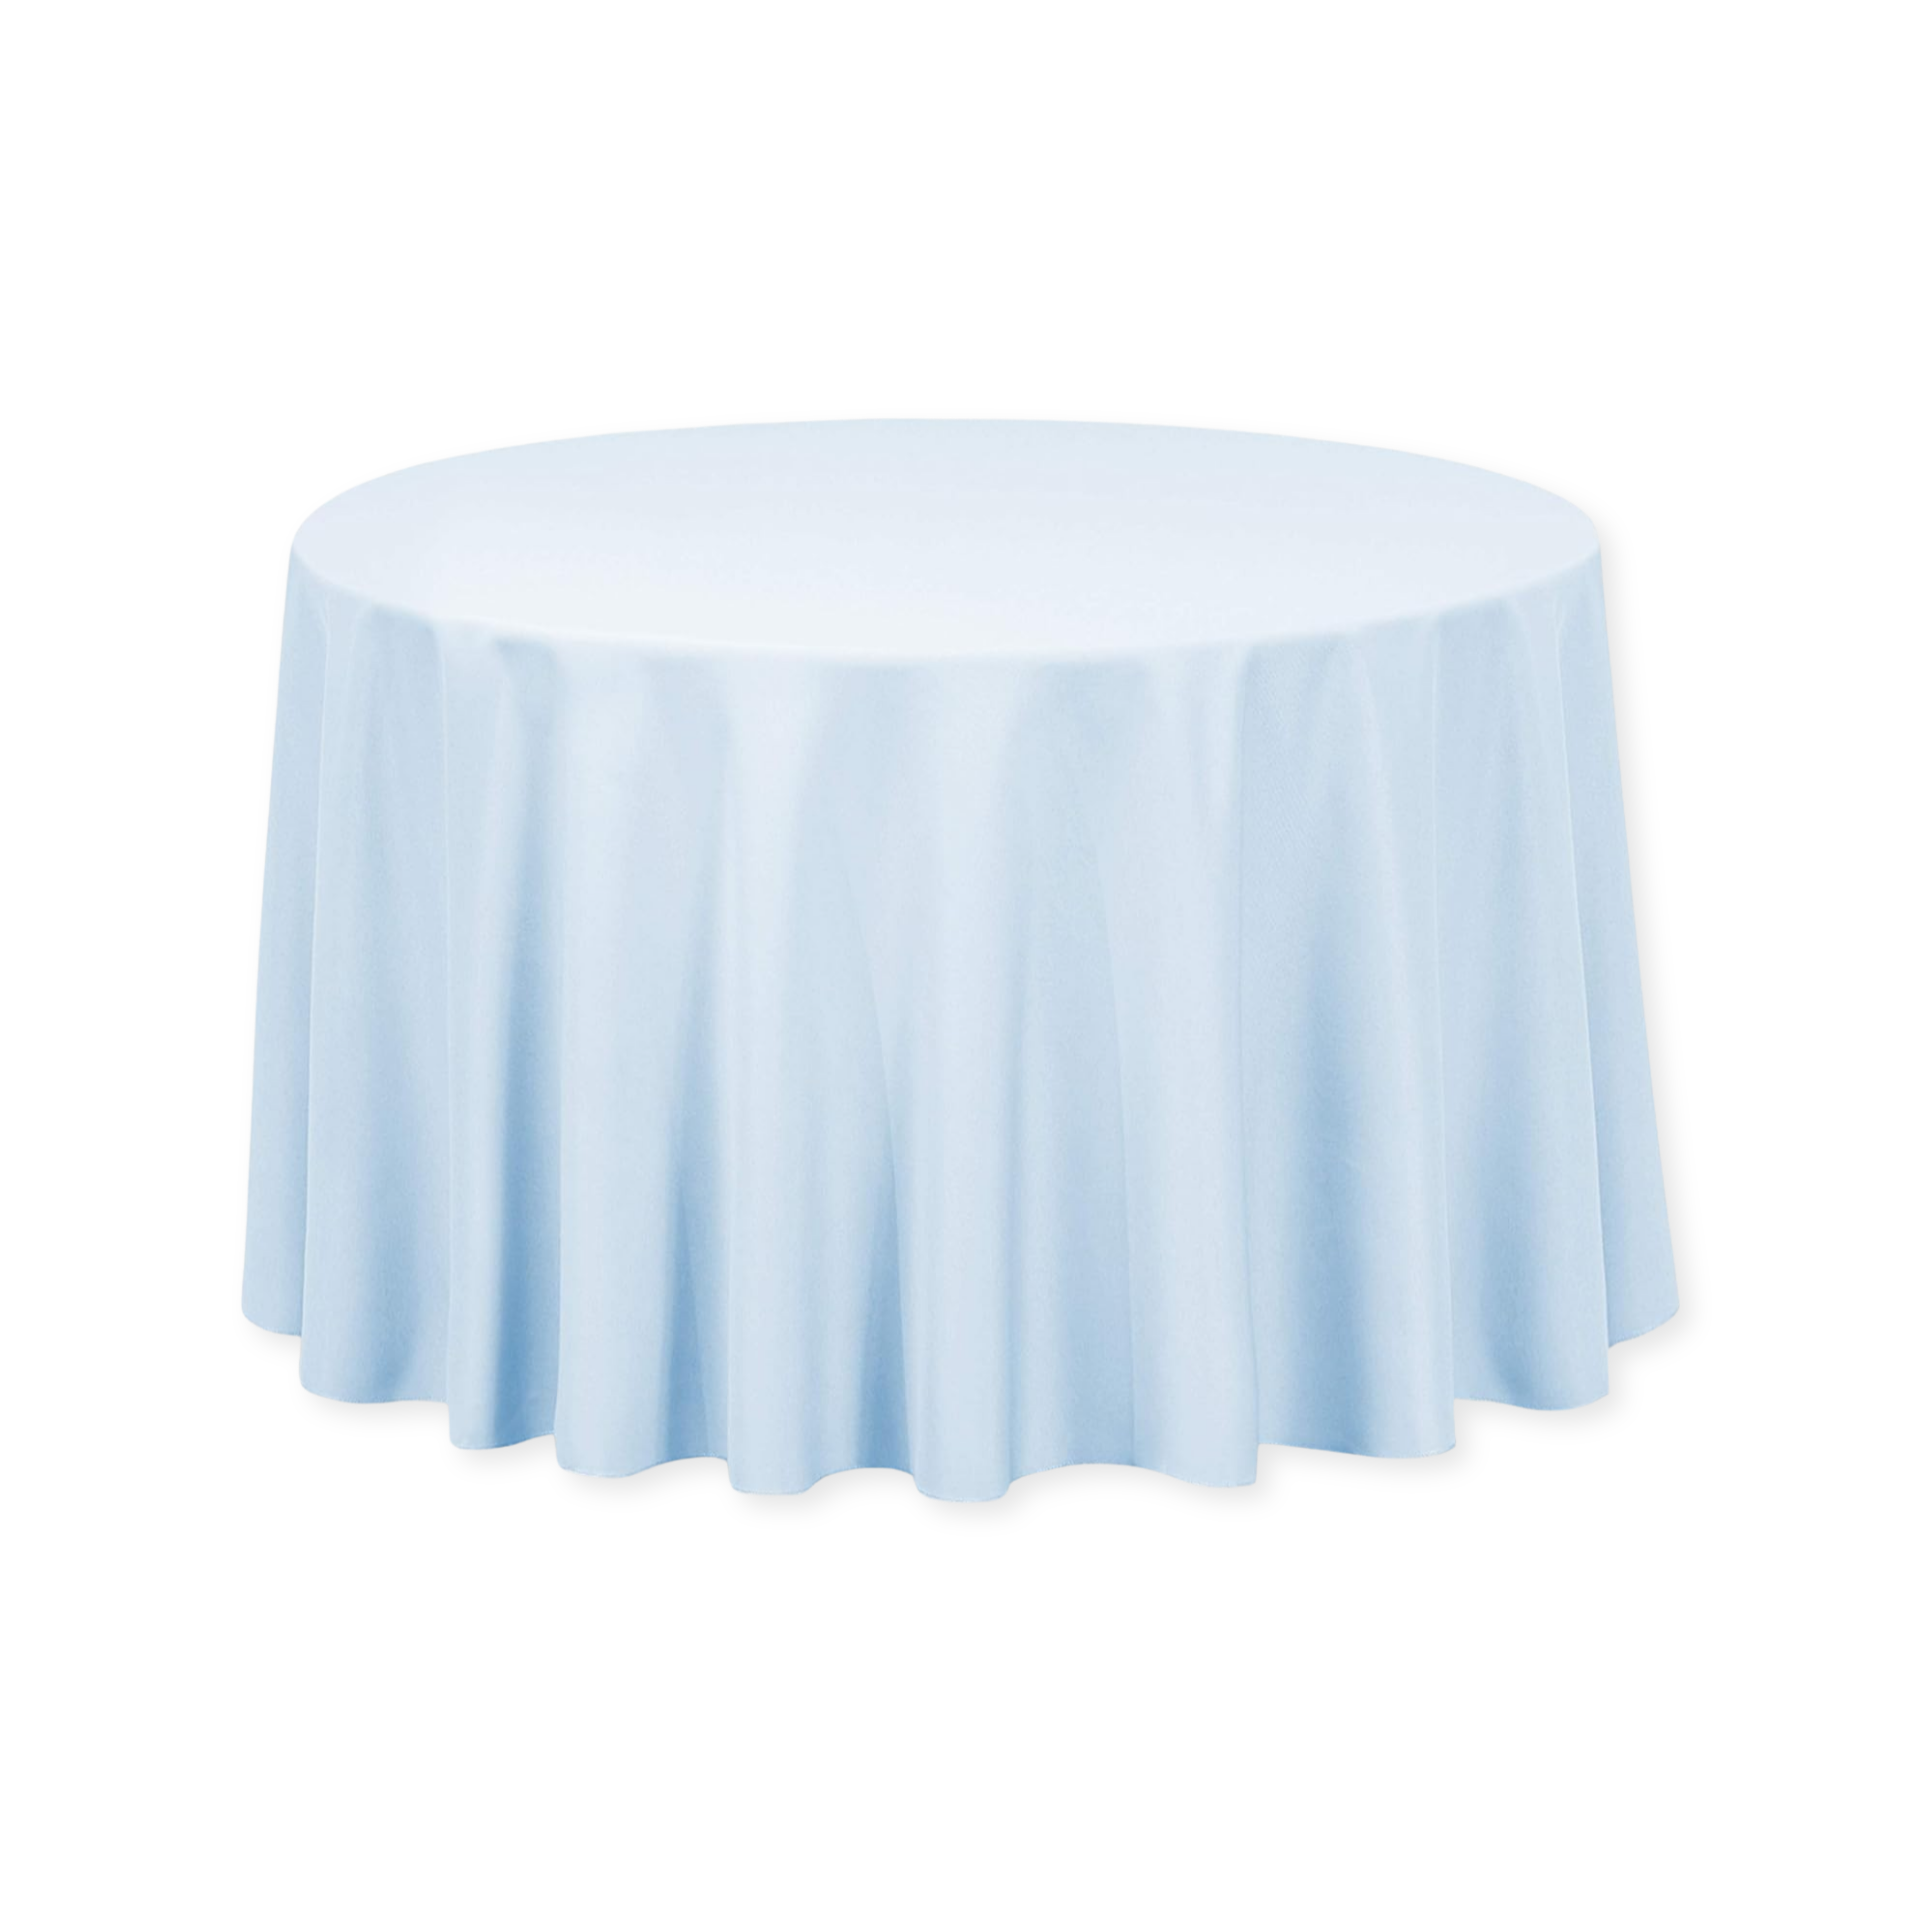 Tablecloth polyester round dusty blue  commercial grade wedding party event rental panama city beach